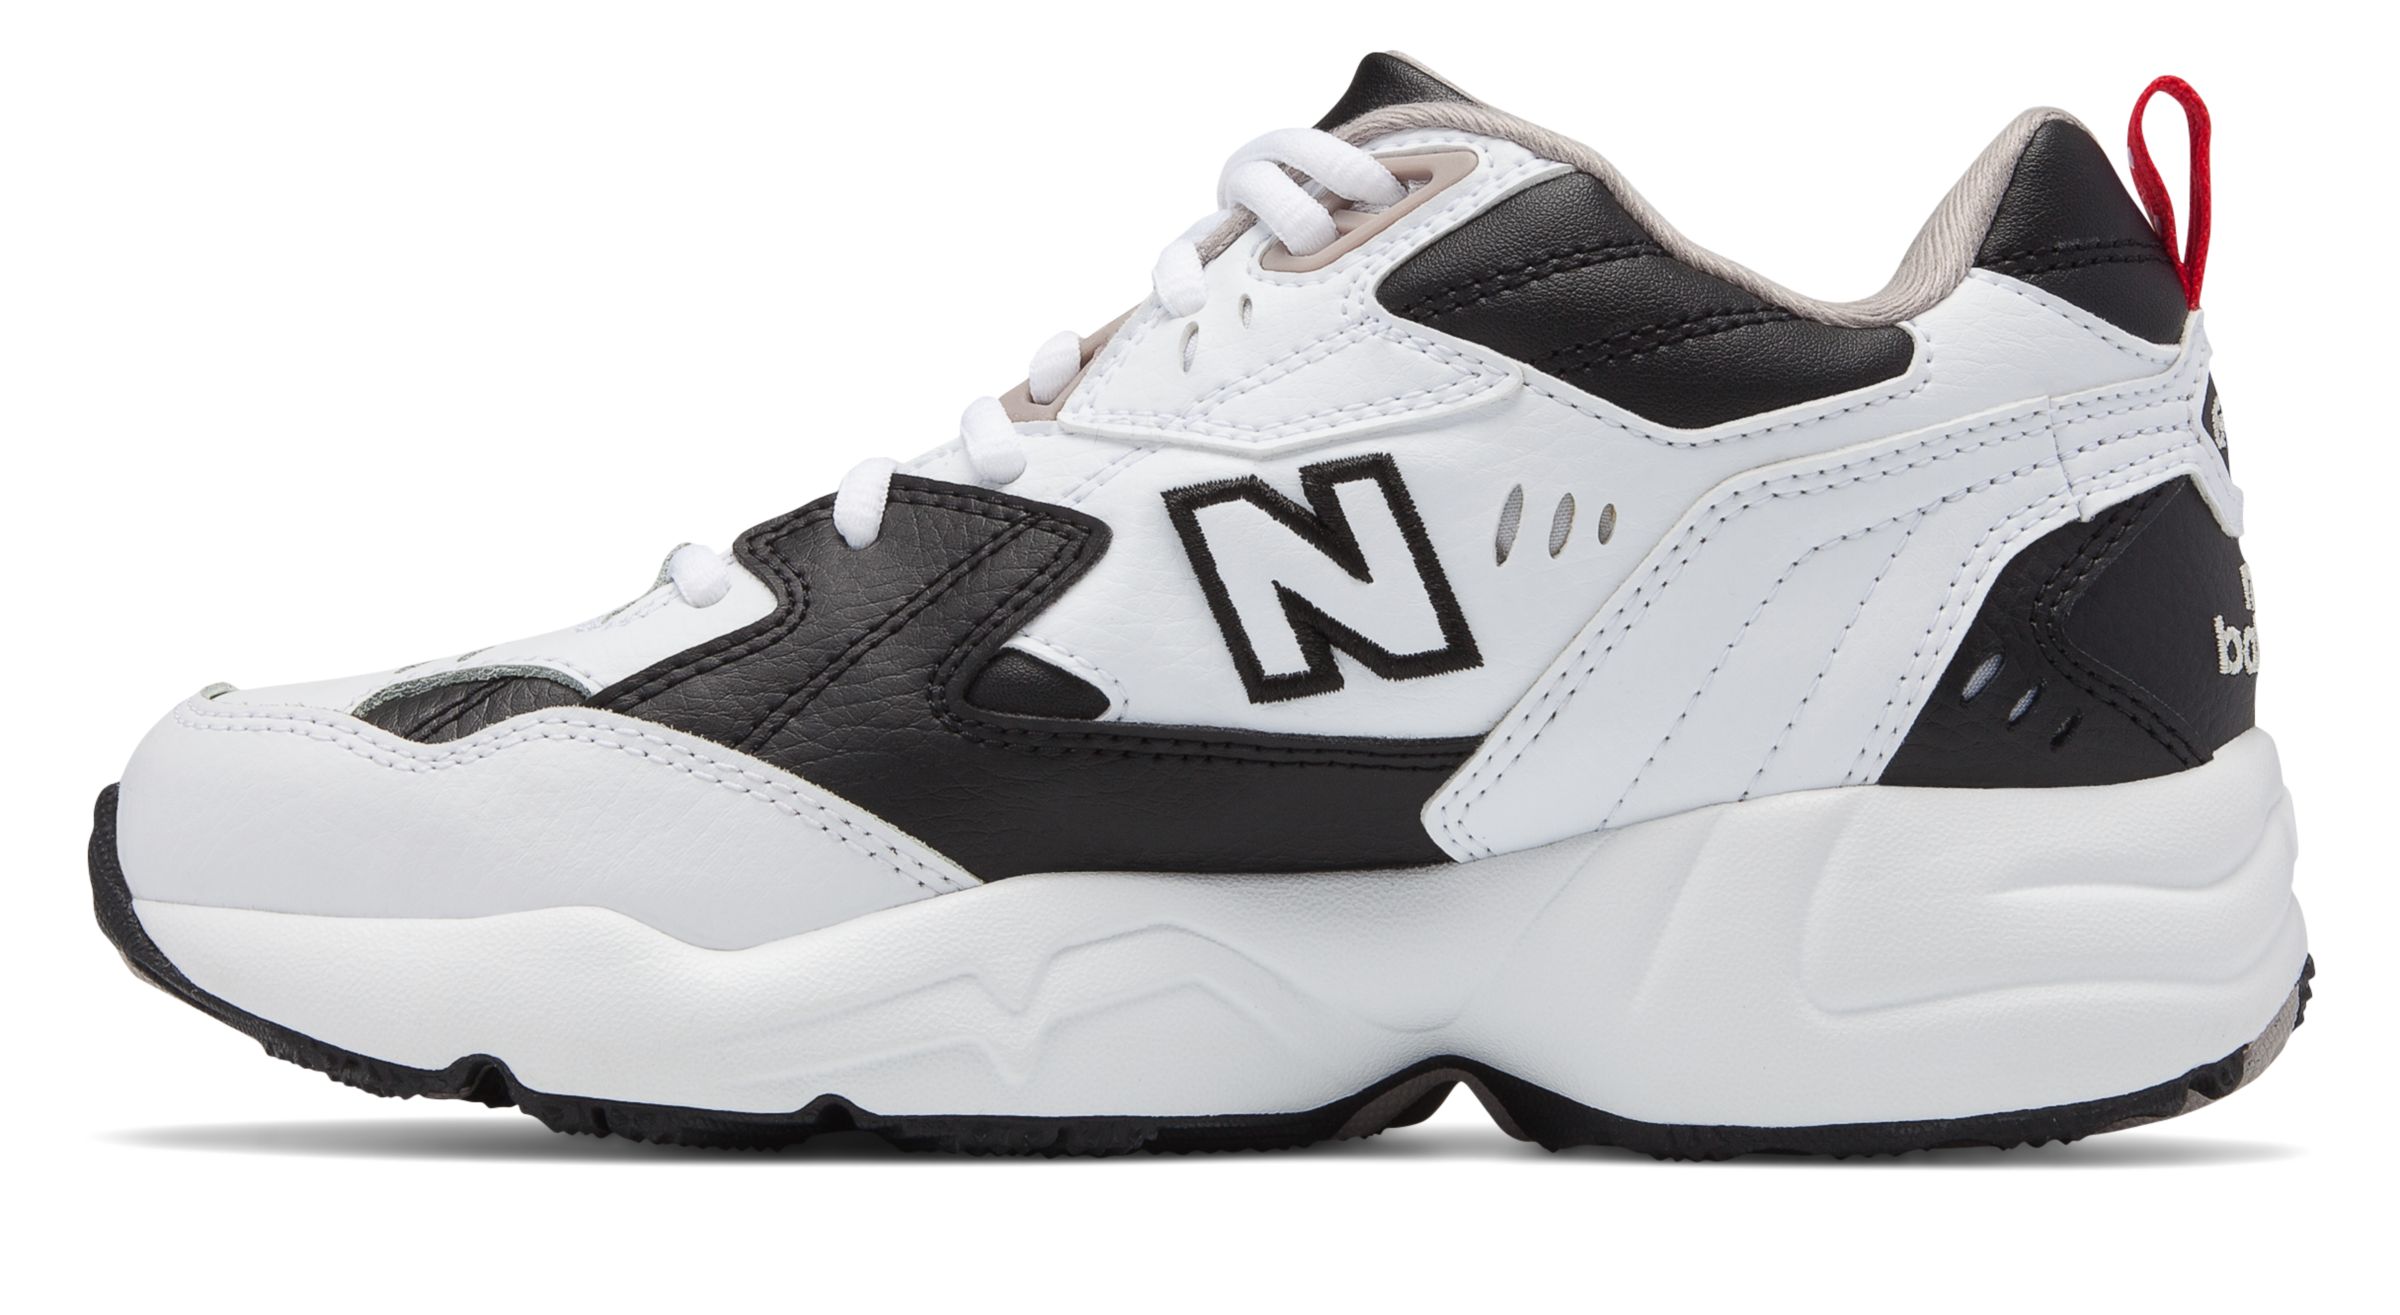 nb 608 homme